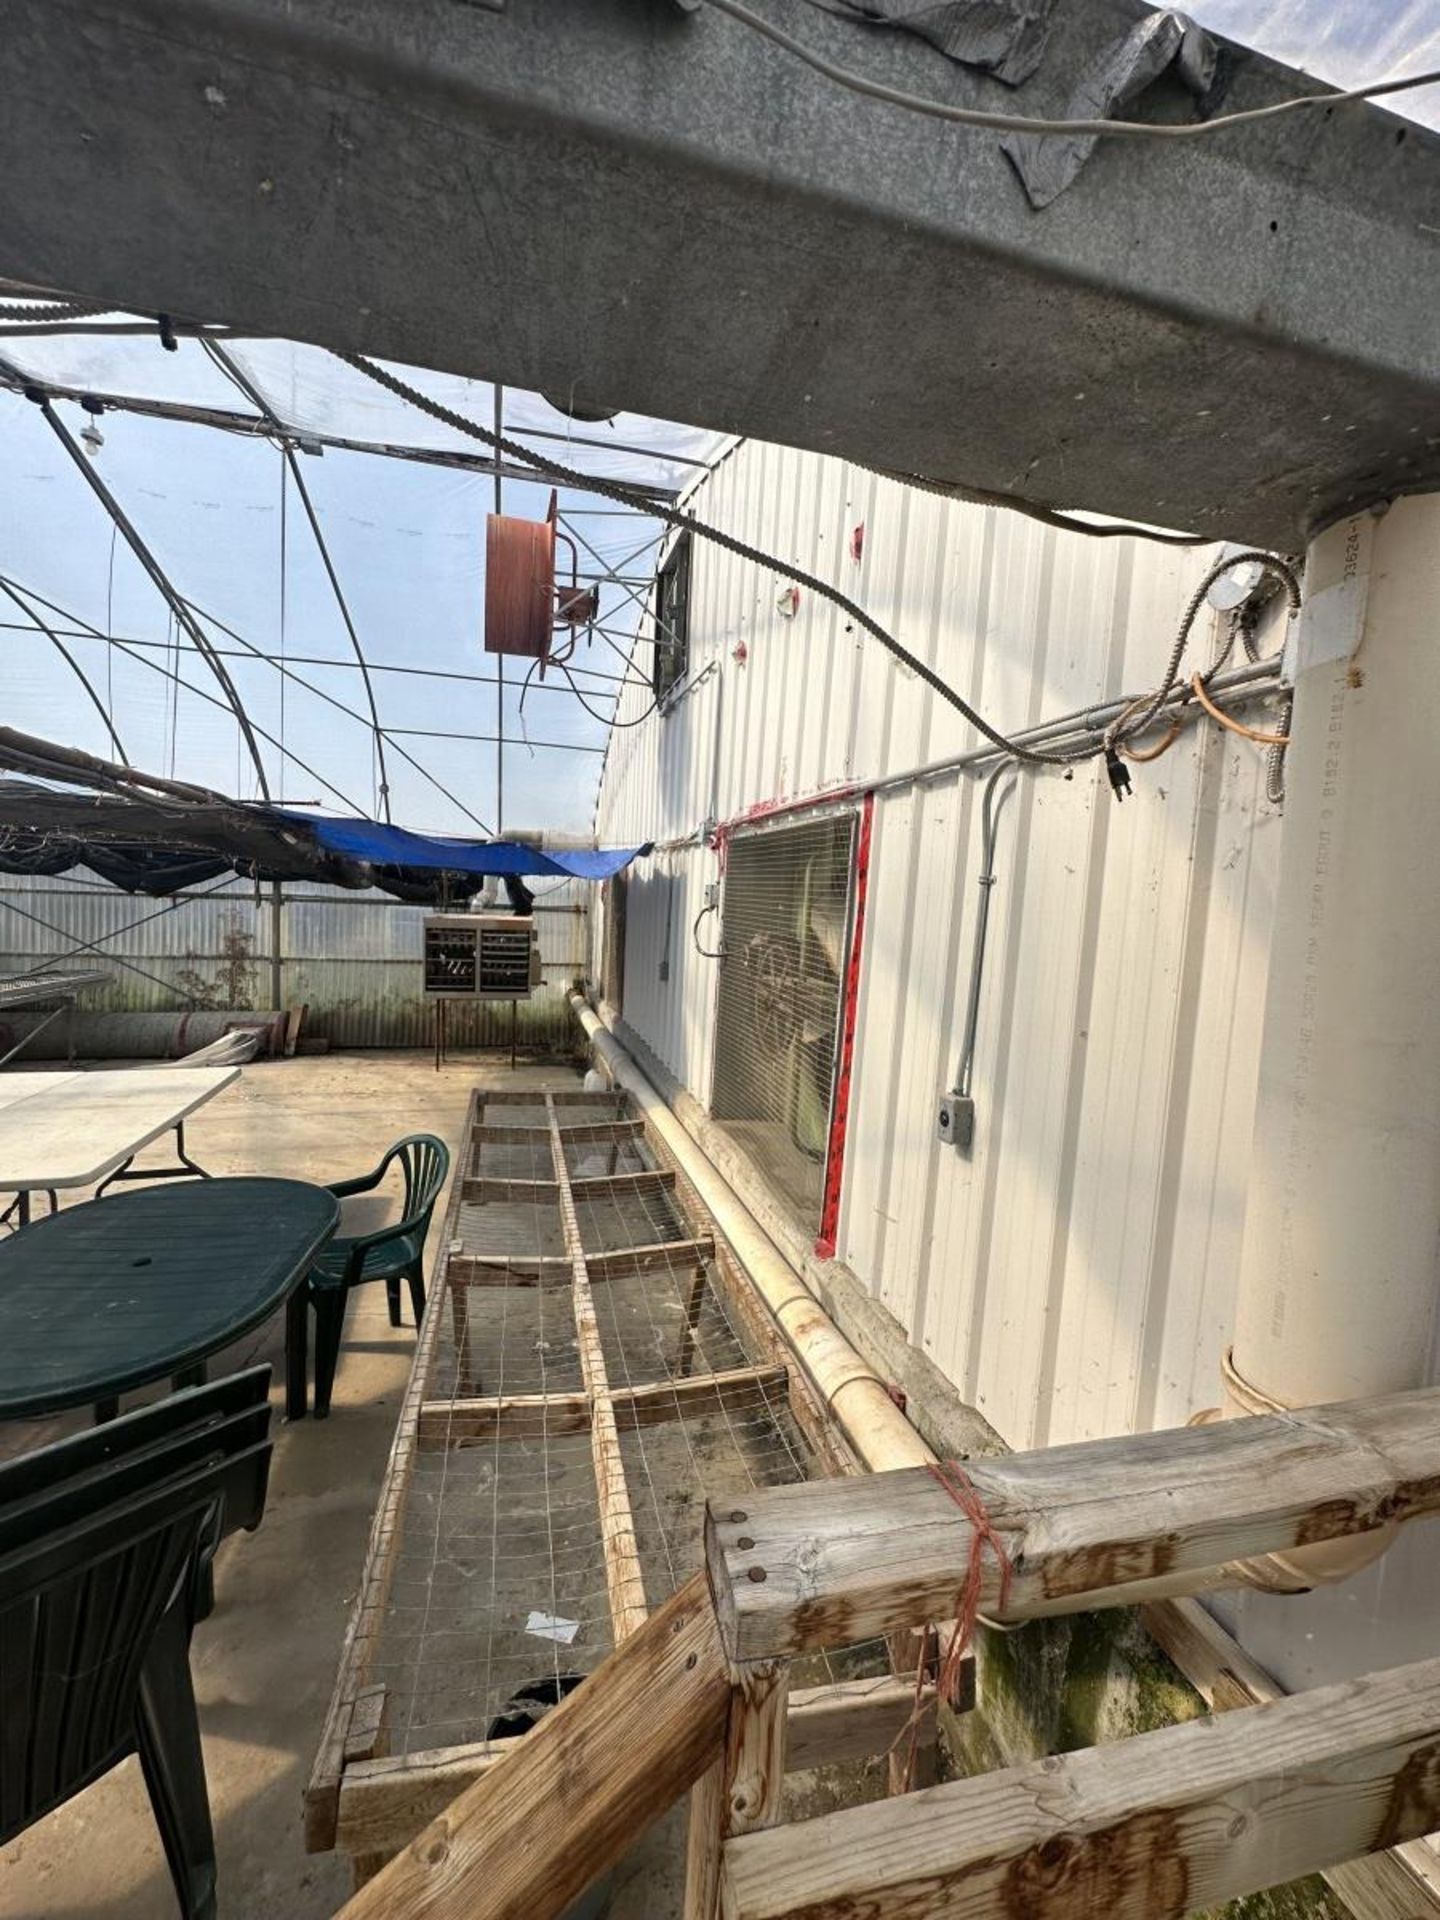 WESTBROOK GUTTER CONNECT 2-BAY GREENHOUSE 60FT X 144FT X 96” H & 2-BAY 60FT X 72 FT X 96”, INCLUDING - Image 37 of 95